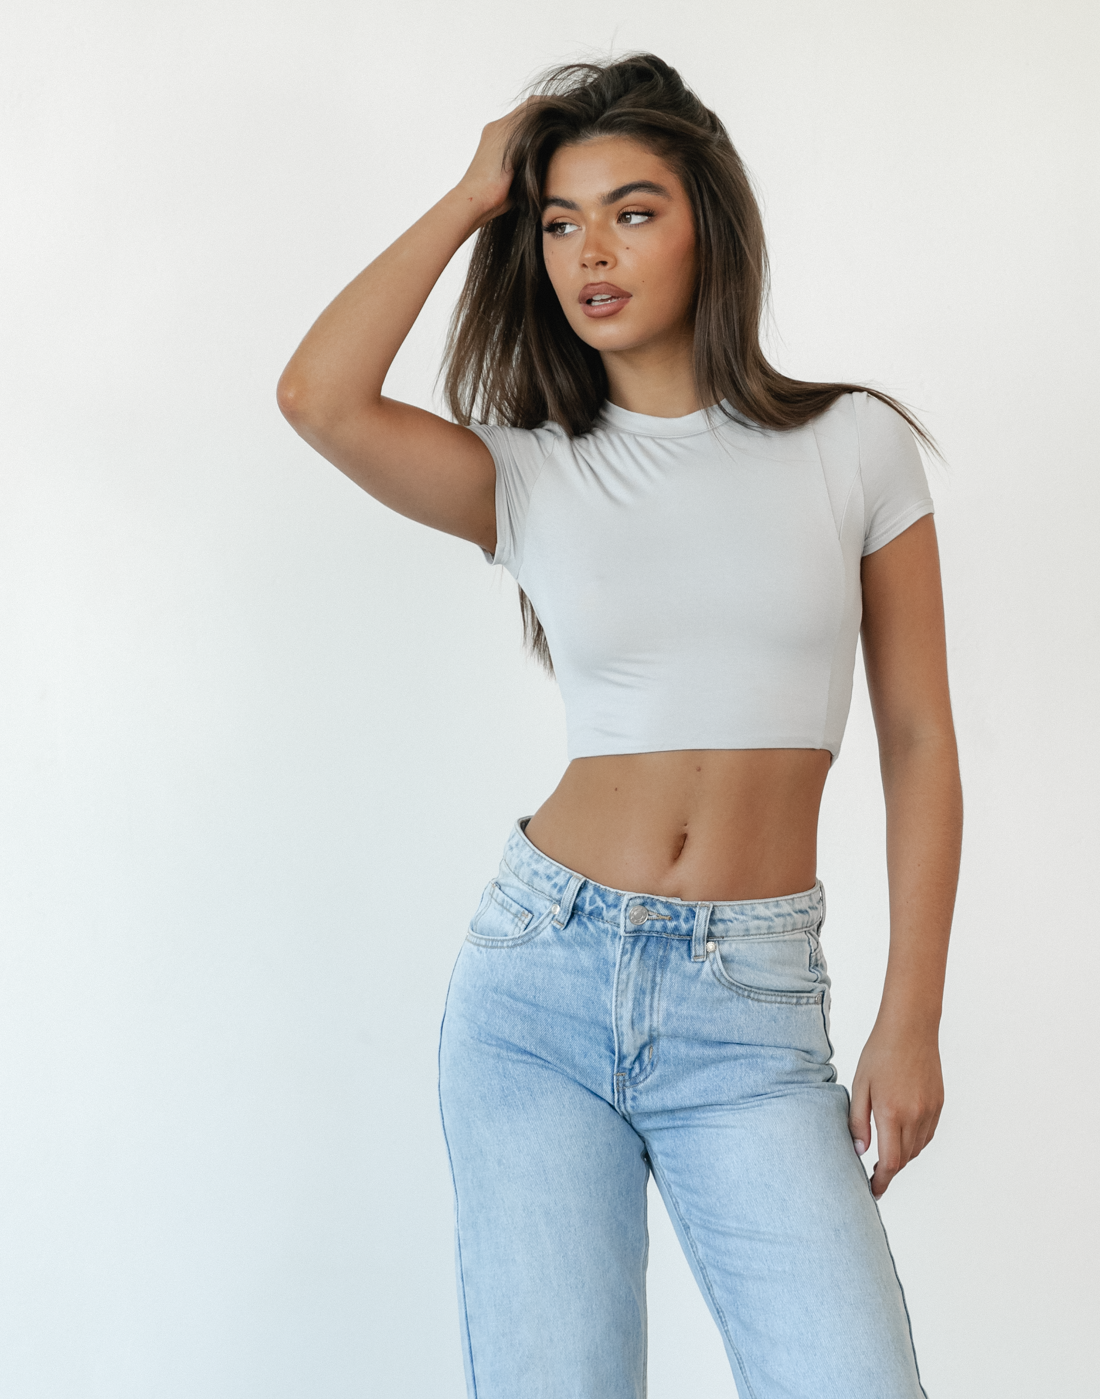 Take Care Crop Top (Grey) - Soft Cropped Tee - Women's Top - Charcoal Clothing